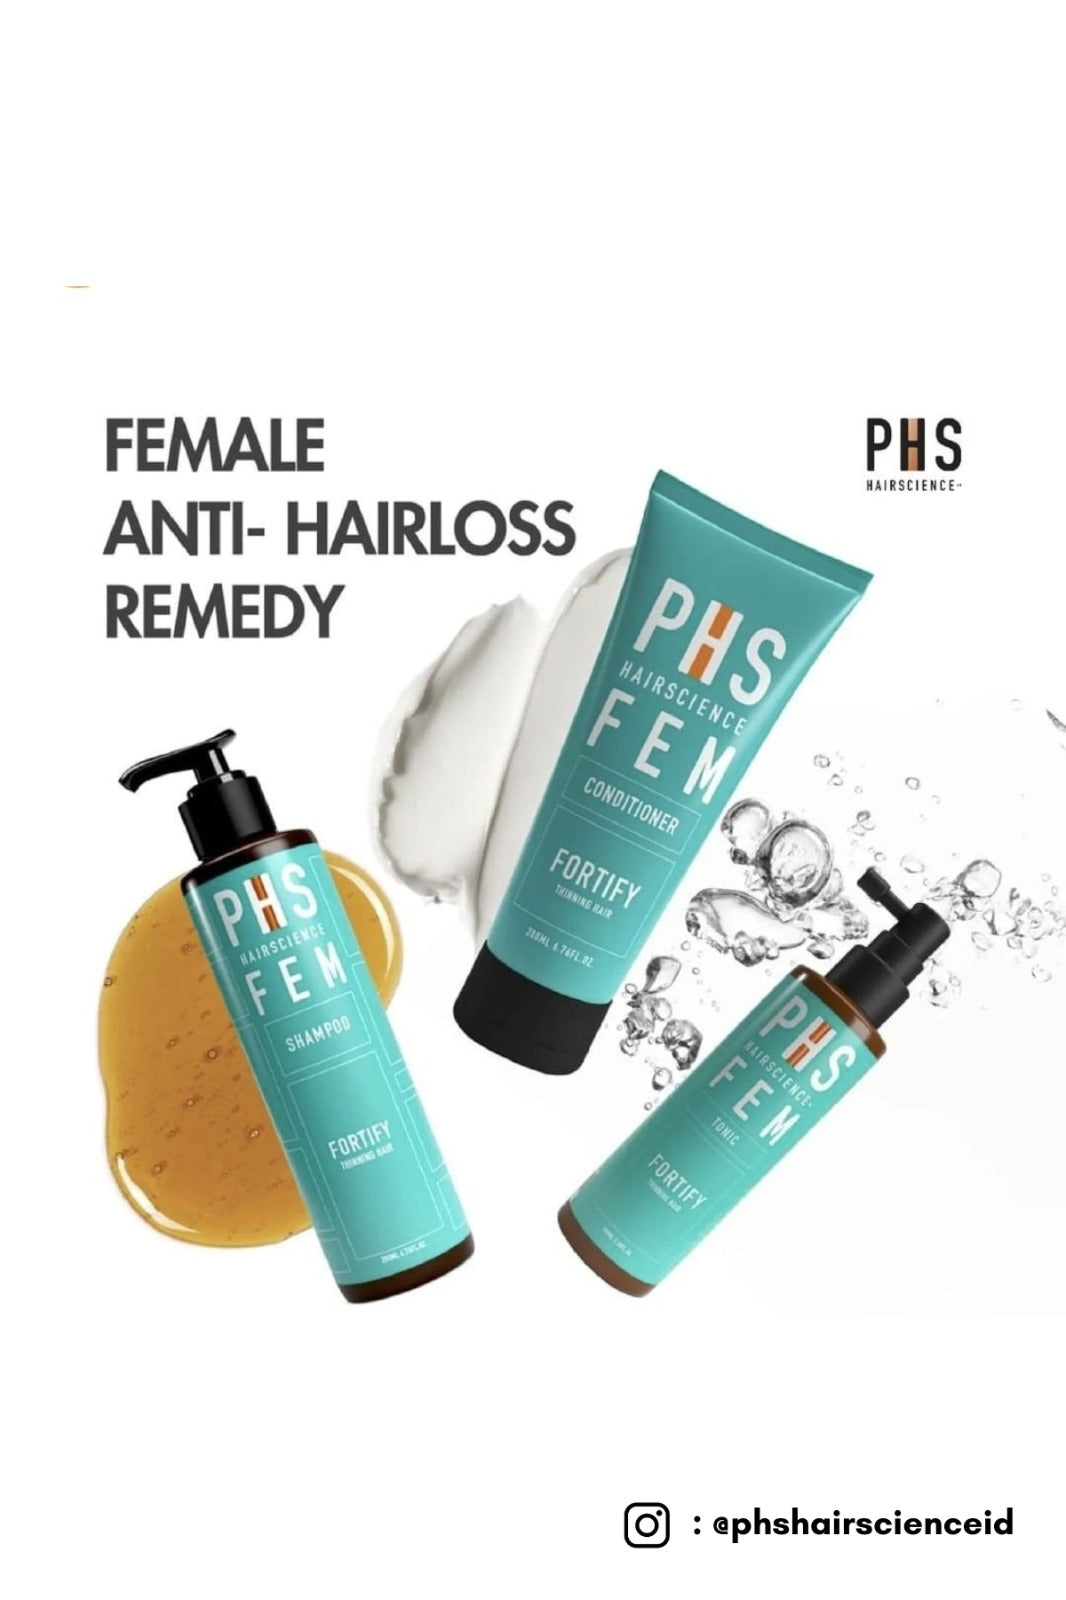 10% OFF ON PHS HAIRSCIENCE